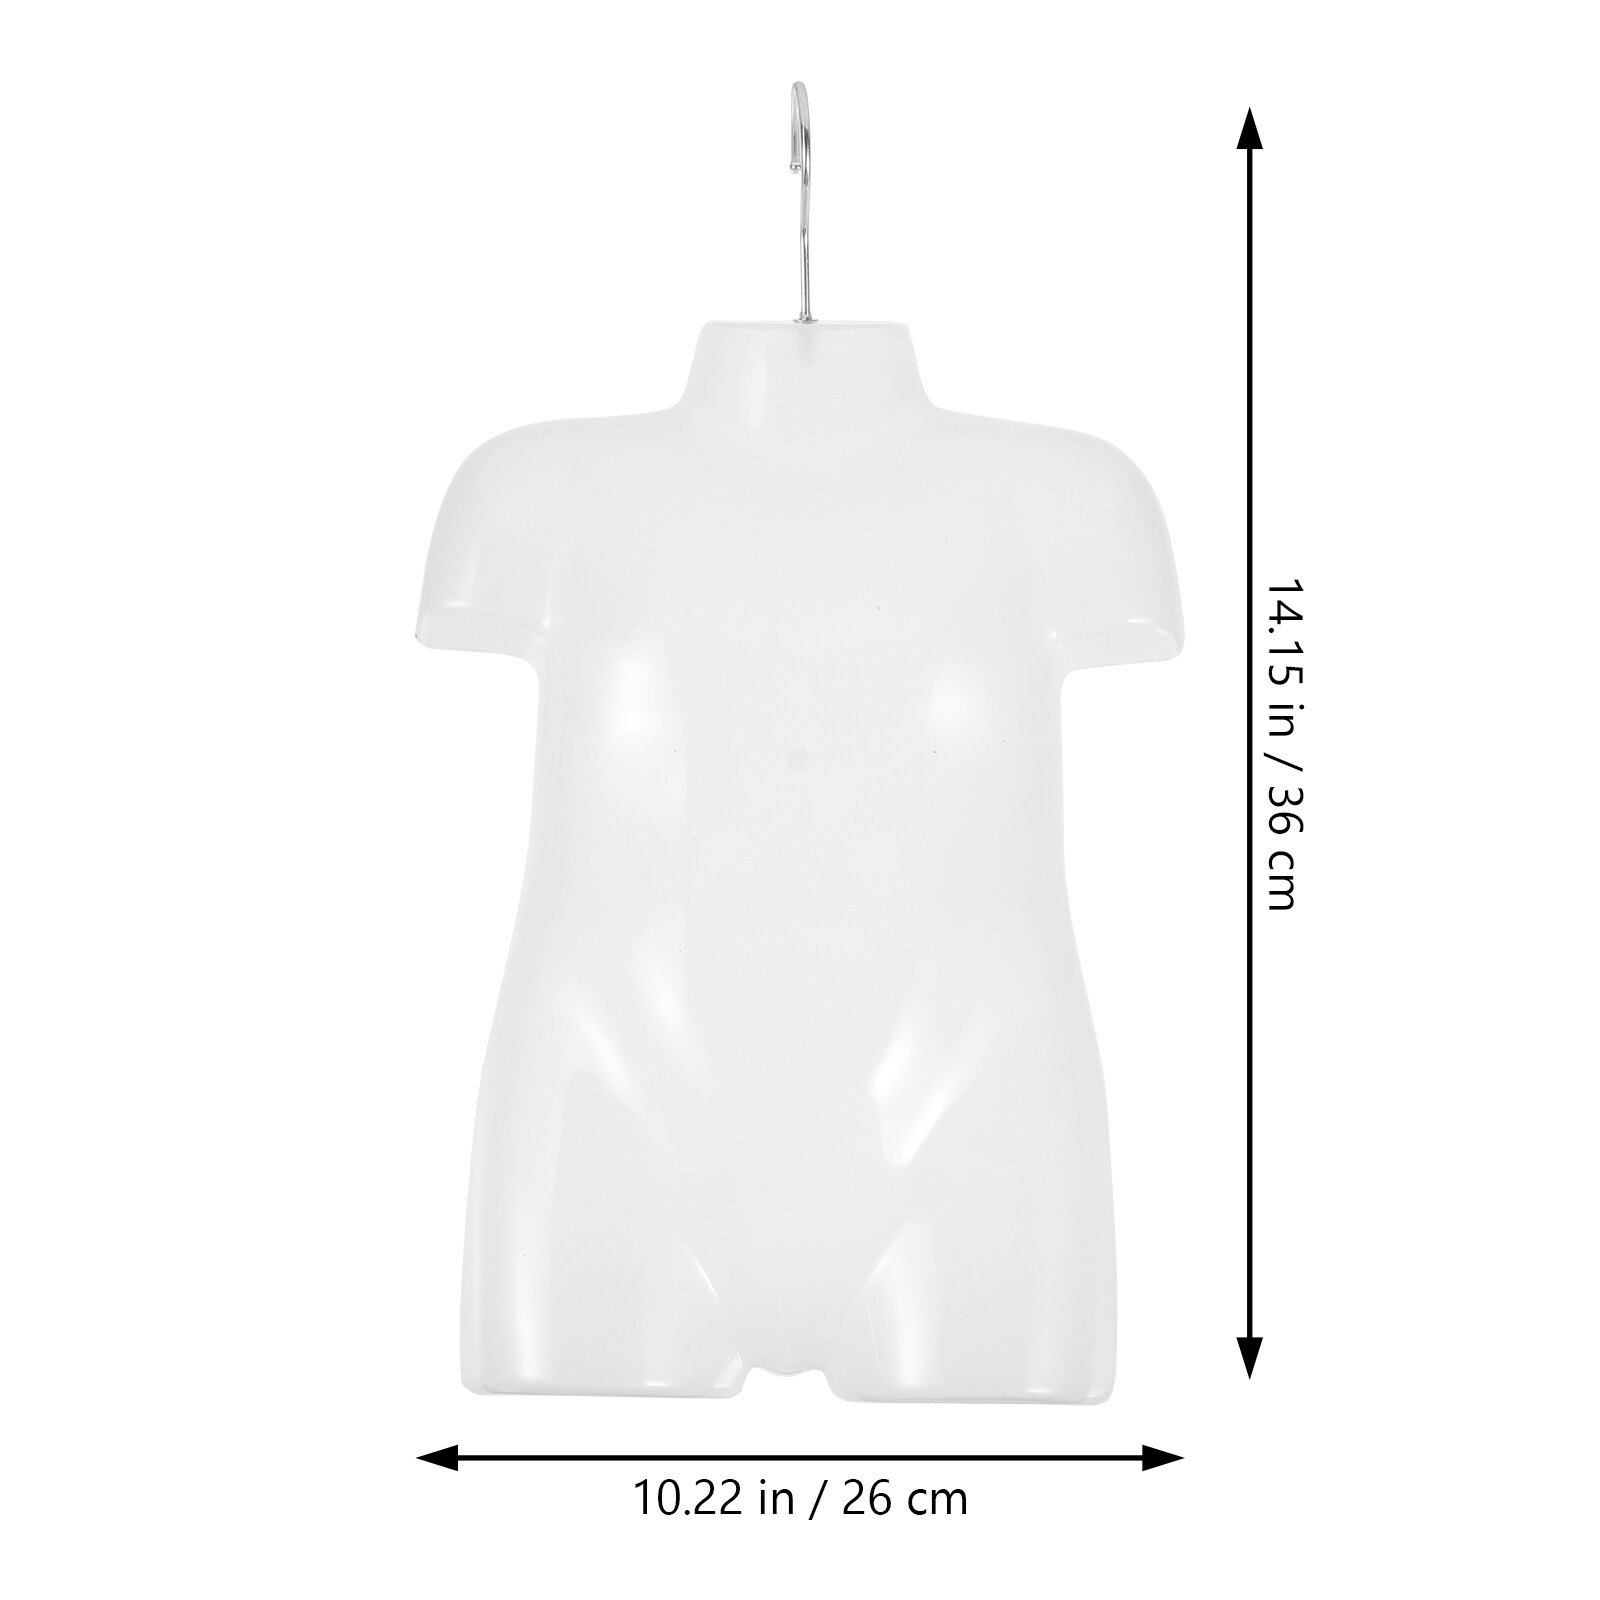 Baby Clothes Mannequin Model Kids Clothing Mannequin Toddler Clothes Display Model with Hanger, Infant Unisex, Size: 36x26cm, Other